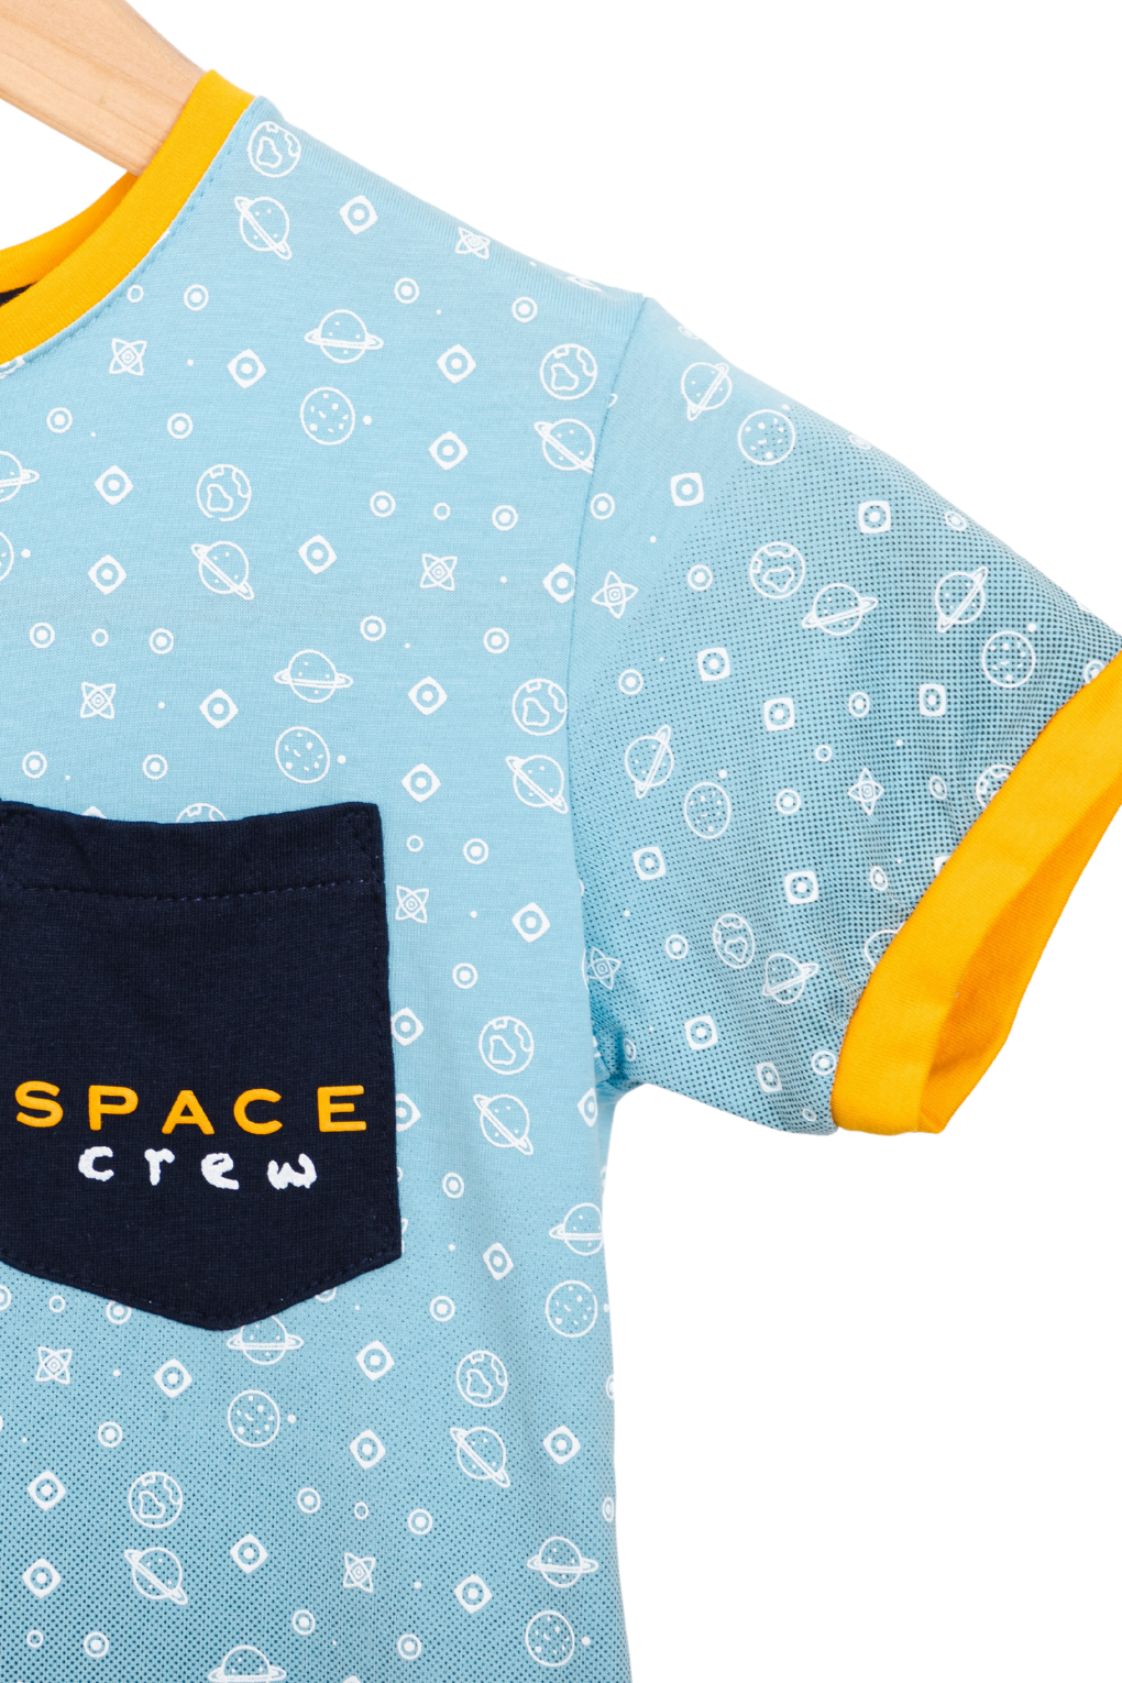 Space theme T-shirt in fading light blue to dark, STEM and non-stereotypical designs by Prisma Kiddos